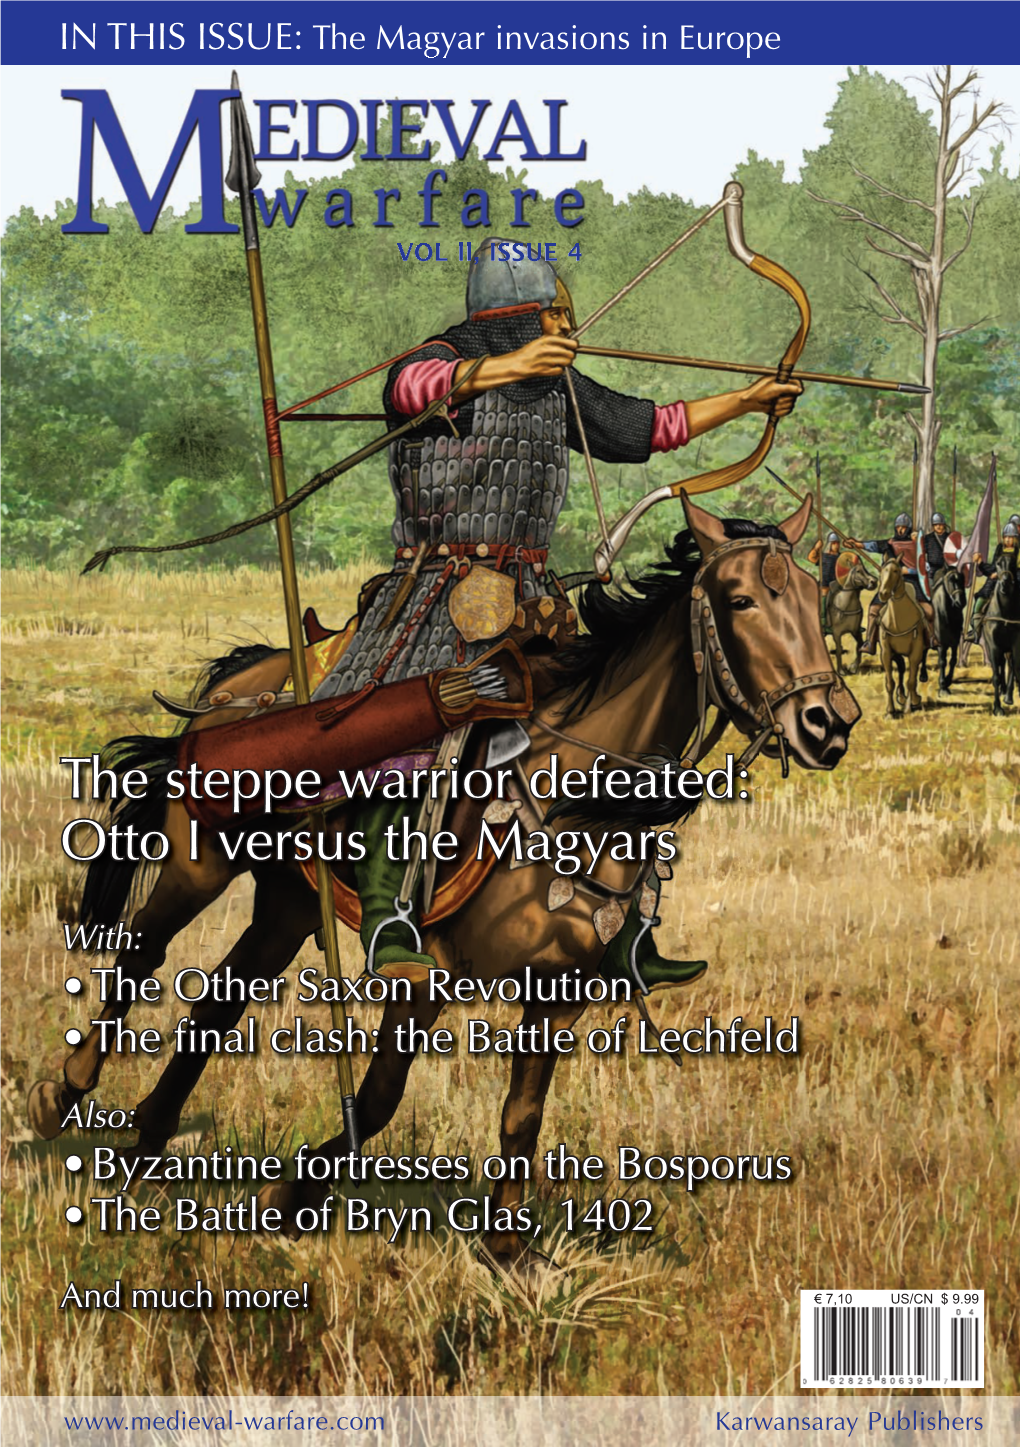 The Steppe Warrior Defeated: Otto I Versus the Magyars